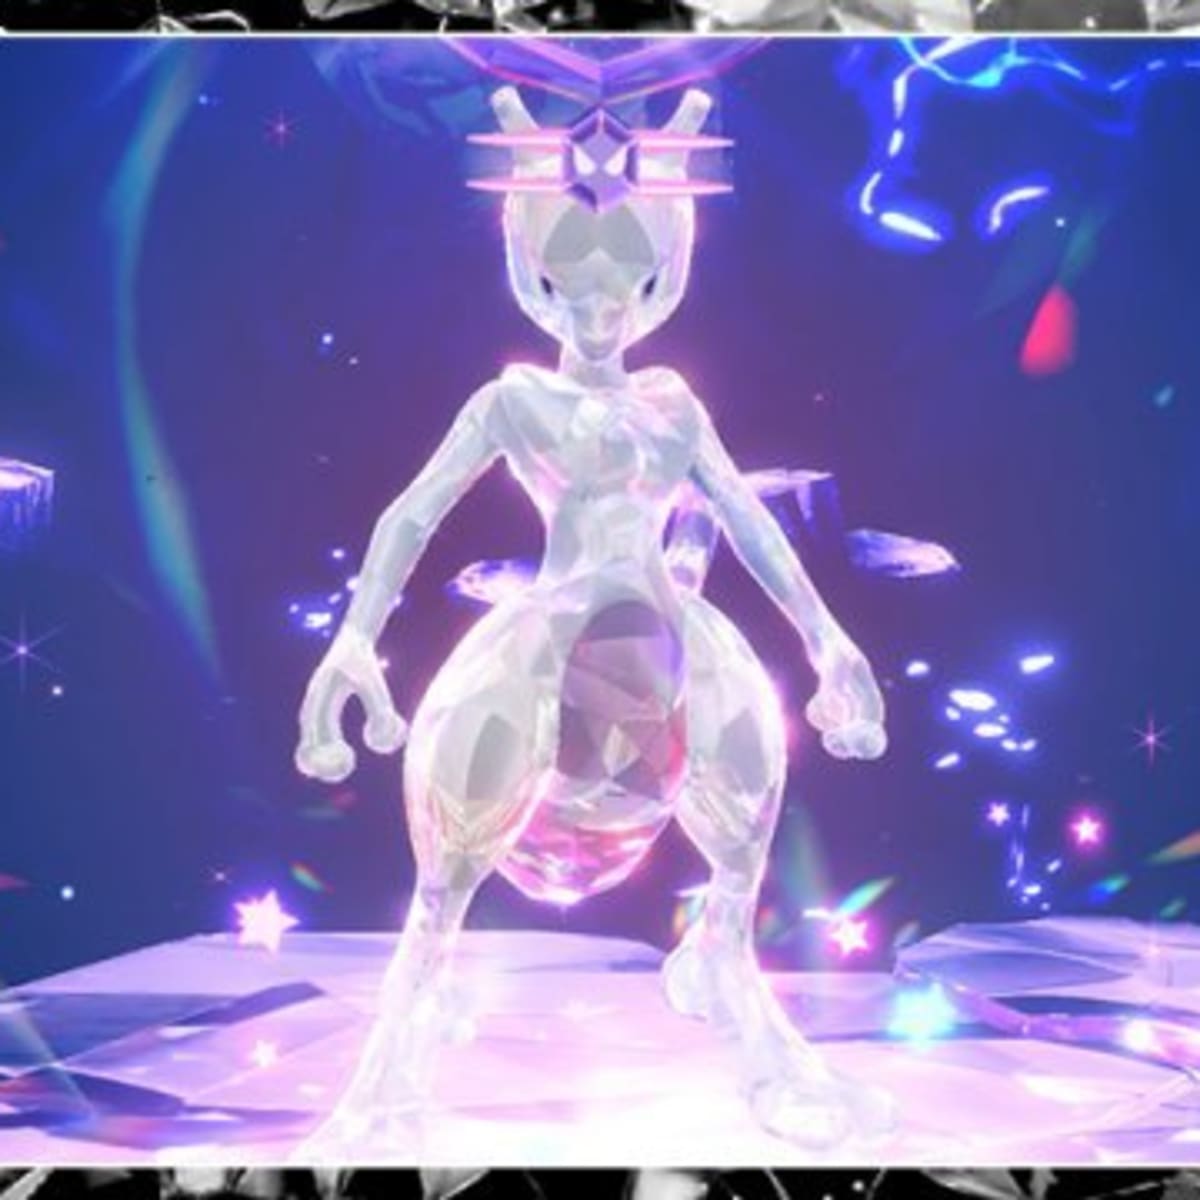 Pokémon Go raid guide: Armored Mewtwo counters, best movesets, and